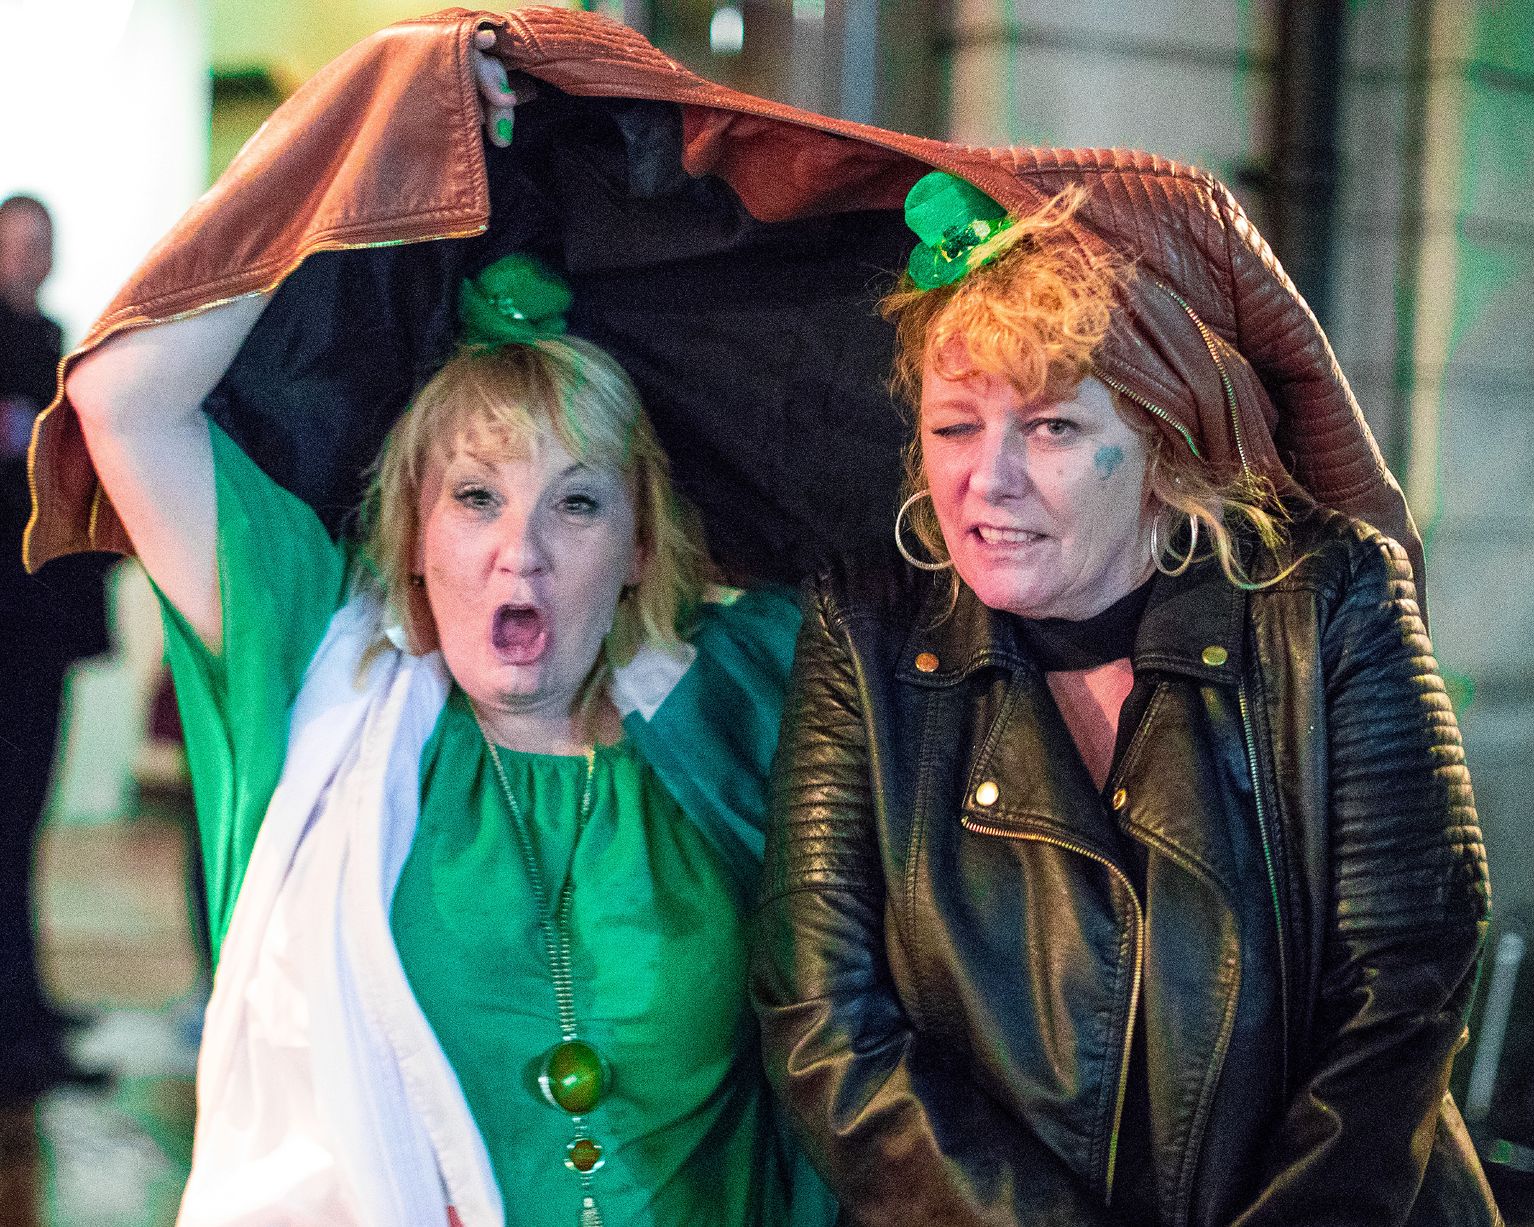 Big night of St Patrick's Day celebrations as revellers pictured looking worse for wear